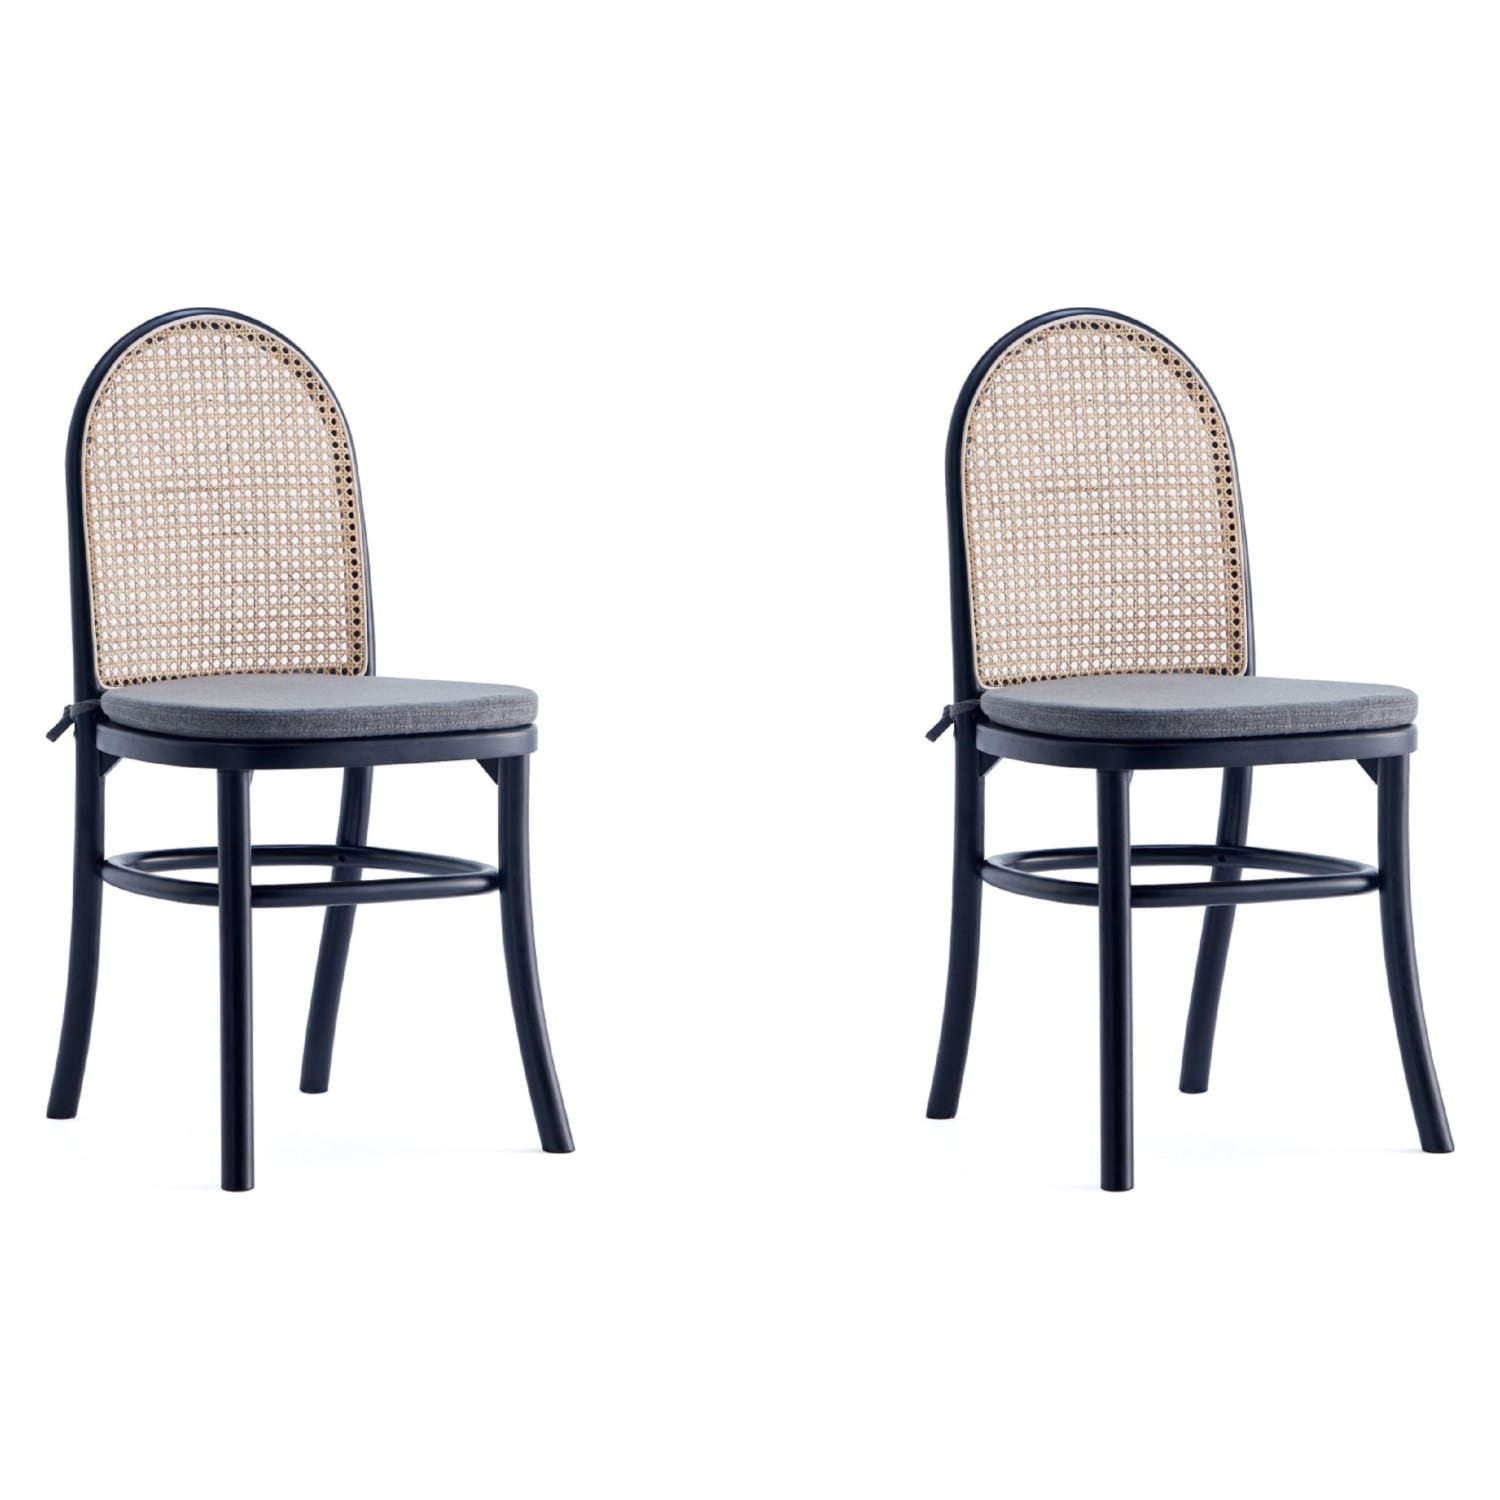 Paragon Dining Chair 1.0 with Gray Cushions in Black and Cane - Set of 2